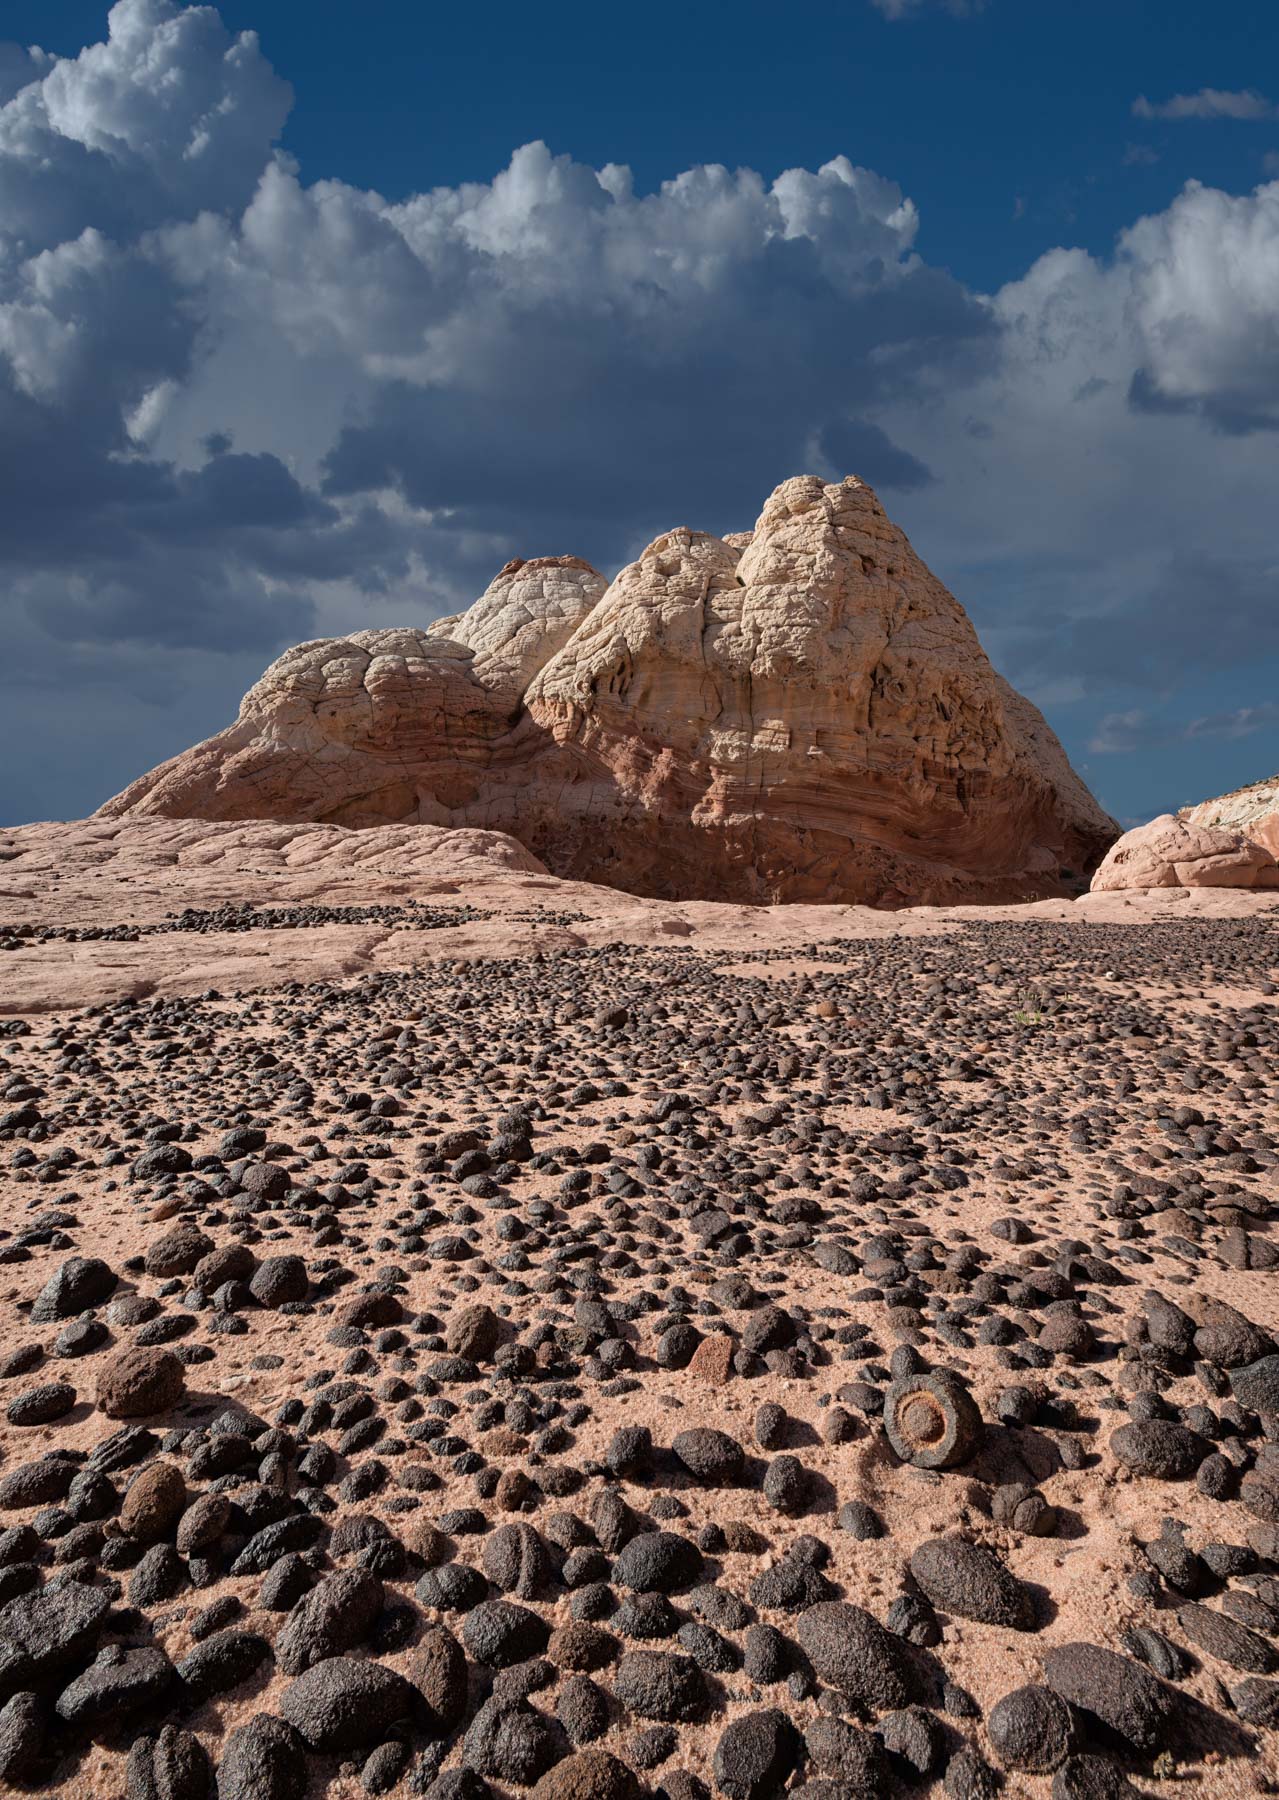 Moqui Marbles at The White Pocket in Vermilion Cliffs National Monument